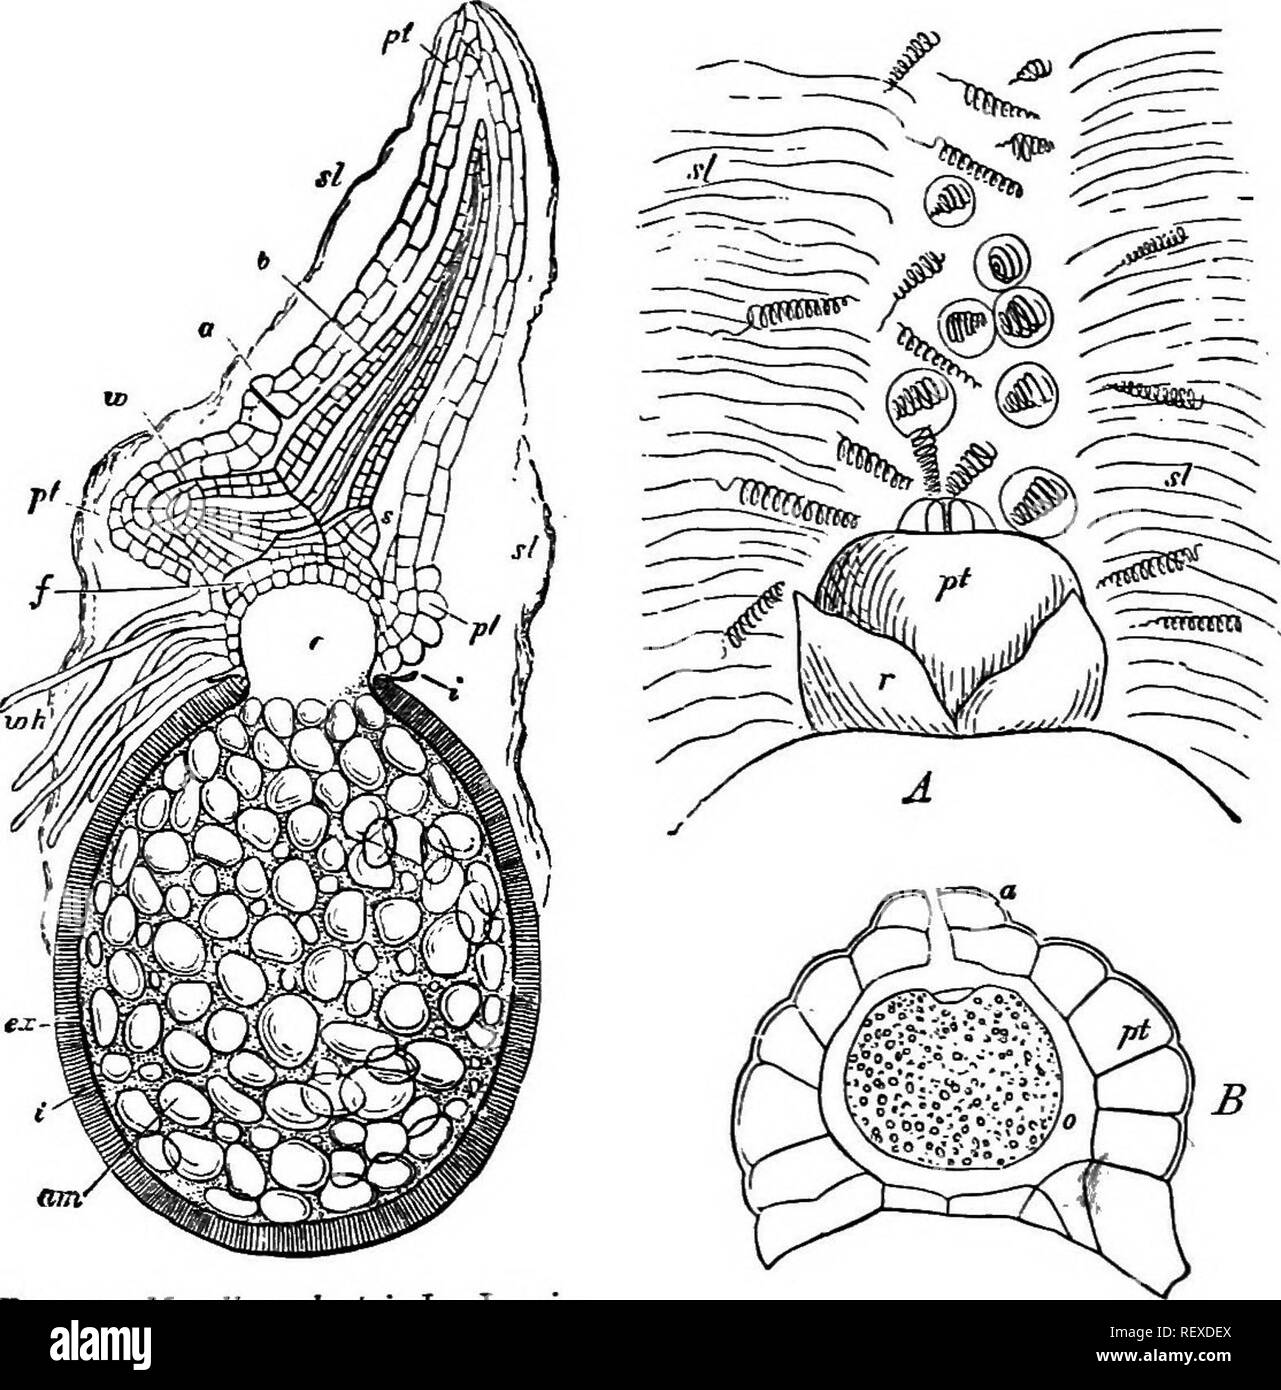 . A handbook of cryptogamic botany. Cryptogams. 32 VASCULAR CRYPTOGAMS the lower and larger portion of the protoplasmic cell-contents contract- ing into an oosphere. If the archegone remains unfertilised the prothal- lium continues to grow into a comparatively large chlorophyllous structure with rhizoids. The male prothallium and antherids are reduced to a still more. Fig. 14.—Marsilea sahatrix L. Longi- tudinal section through megaspore, pro- thallium, and embryo. a;«, starch grains; r, inner ccat ; ex^ epispore; c, space heneath diaphragm ; pt.^ prothal- lium ; -wkj its rhizoids; a, archegon Stock Photo